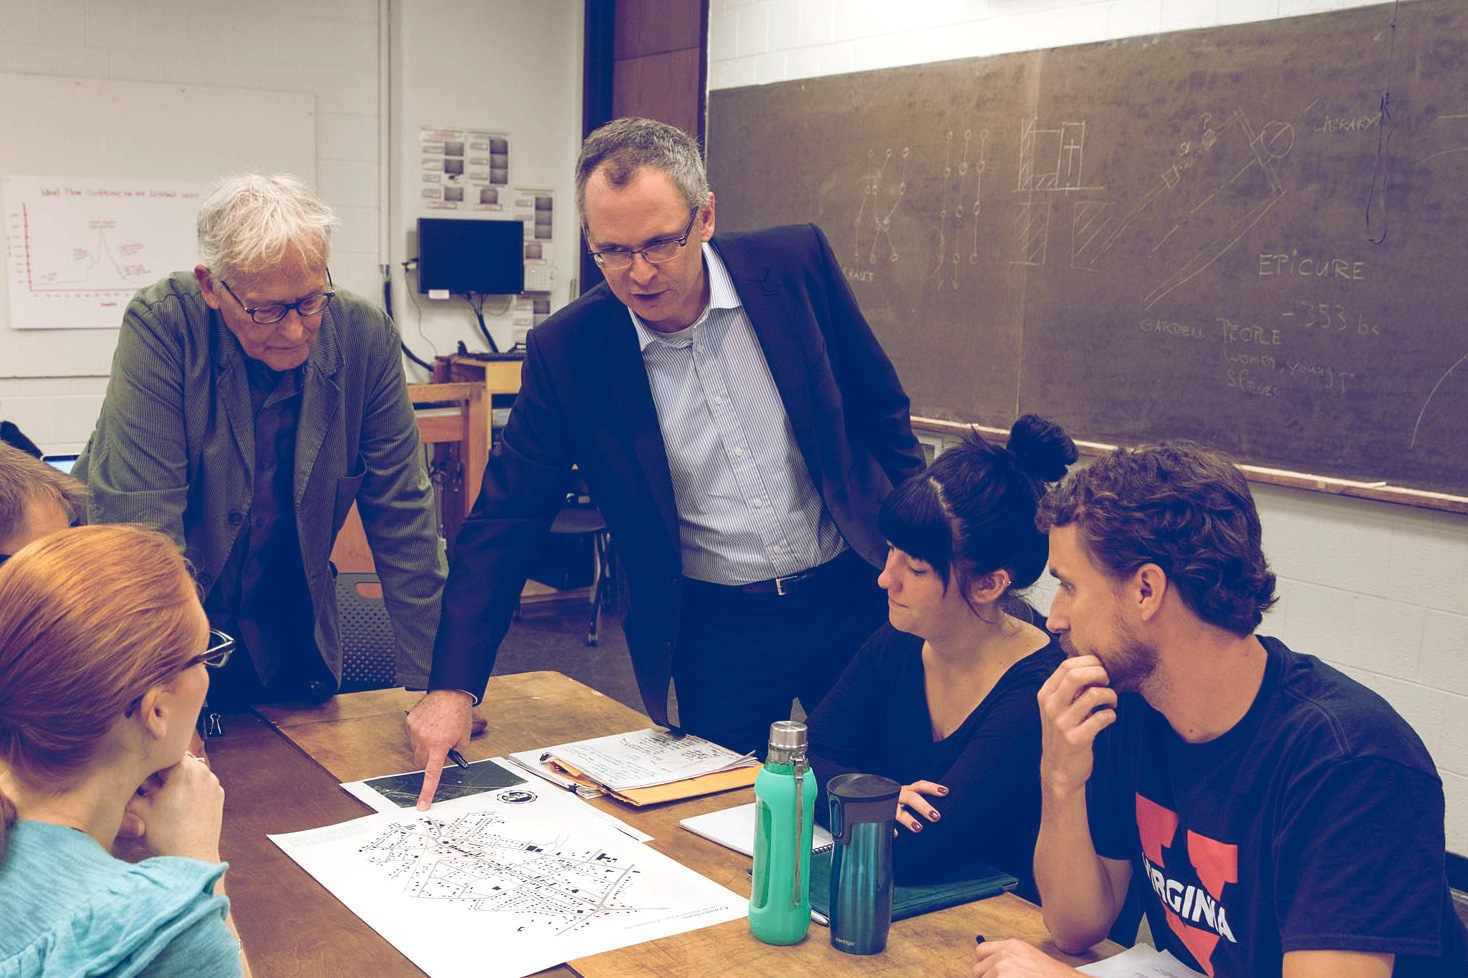 Johnston, standing at right, and Philippe Revault, left, talk with students while pointing to paper plans on the table